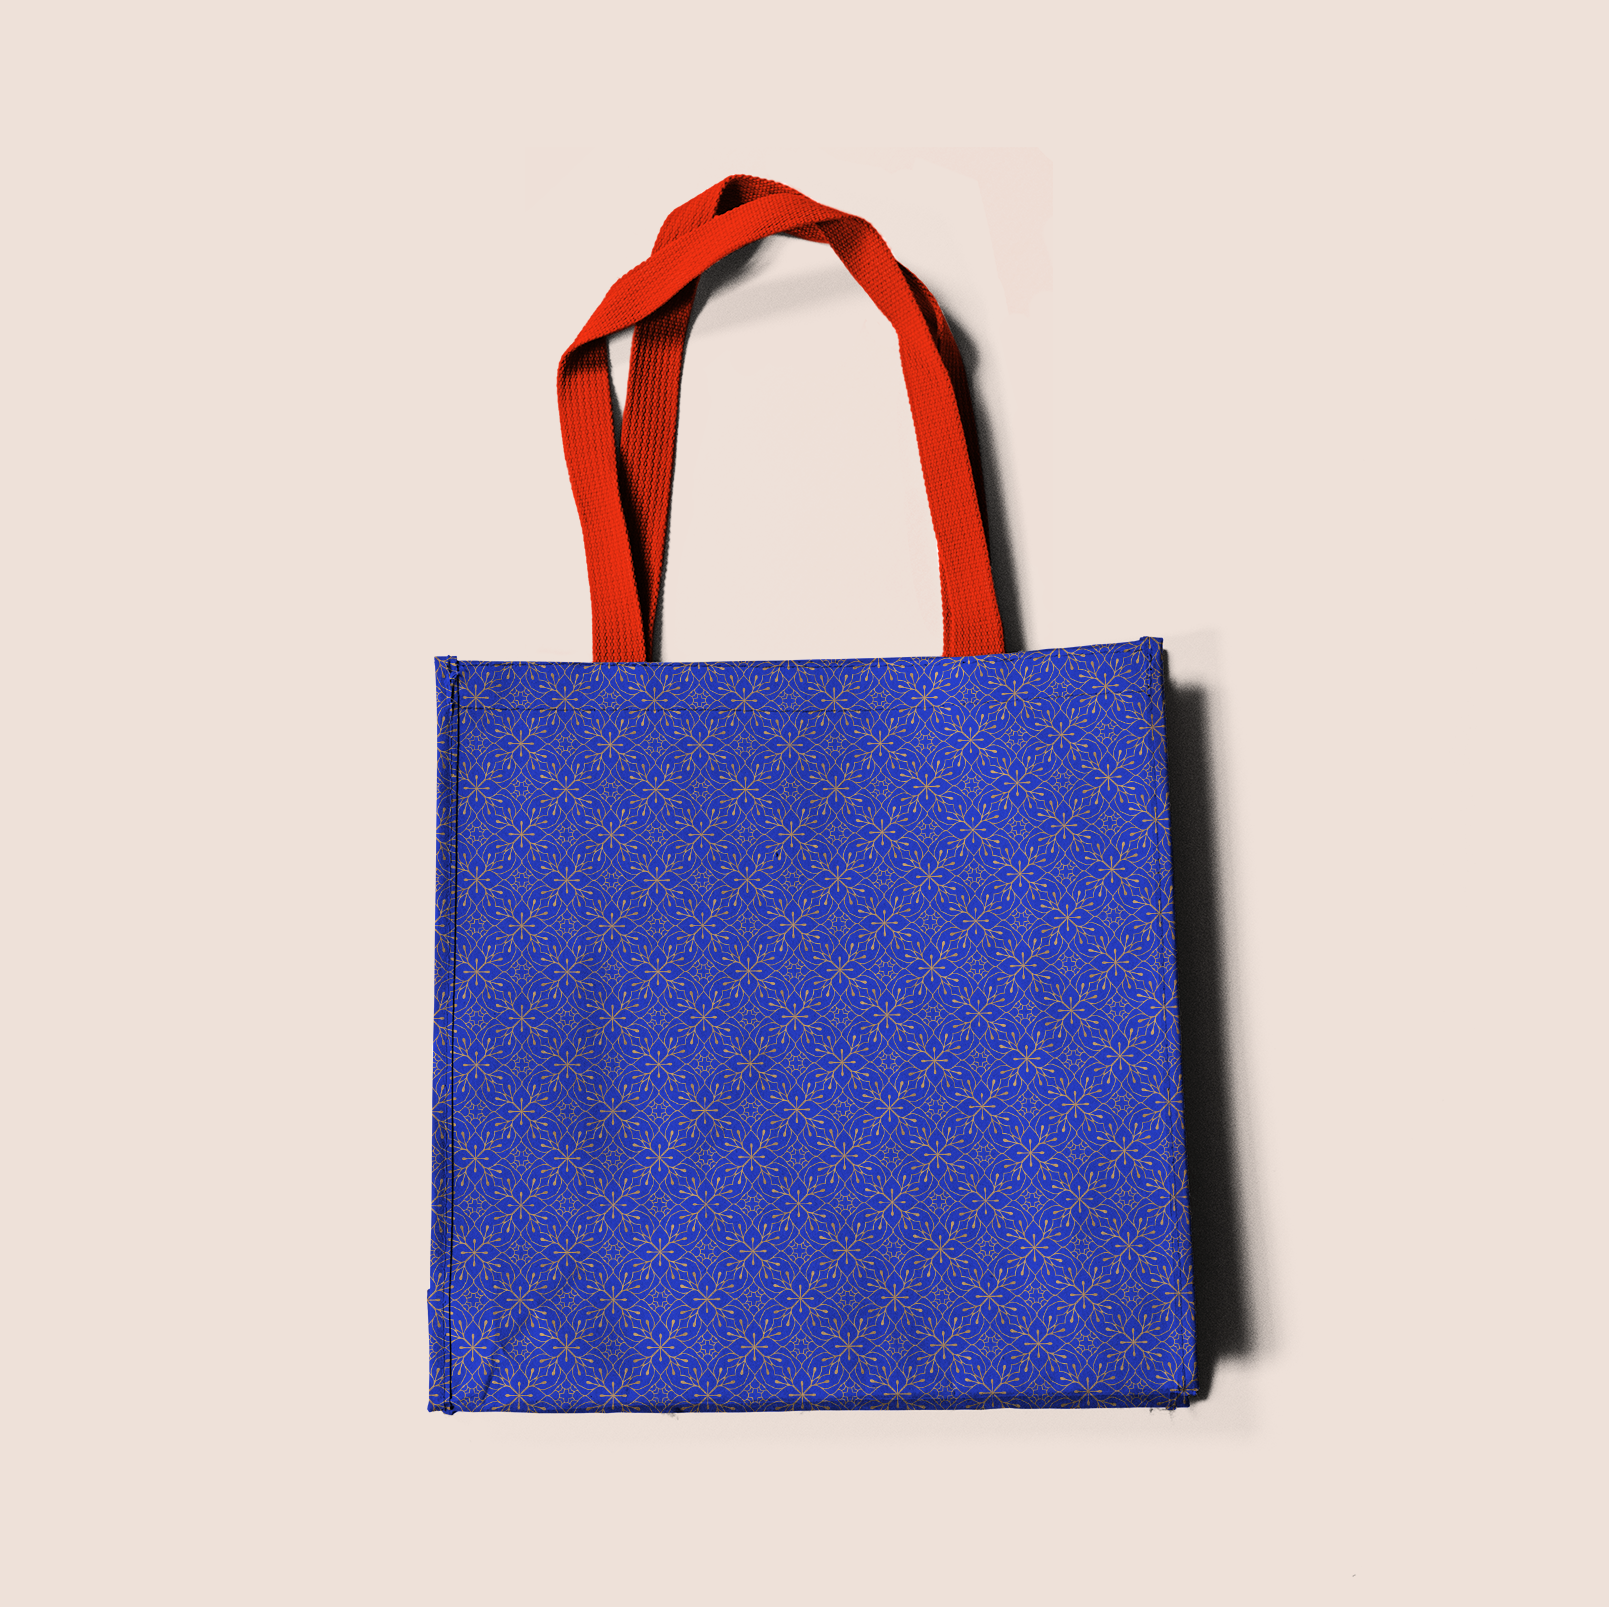 Golden arabesque in blue pattern design printed on recycled fabric bags